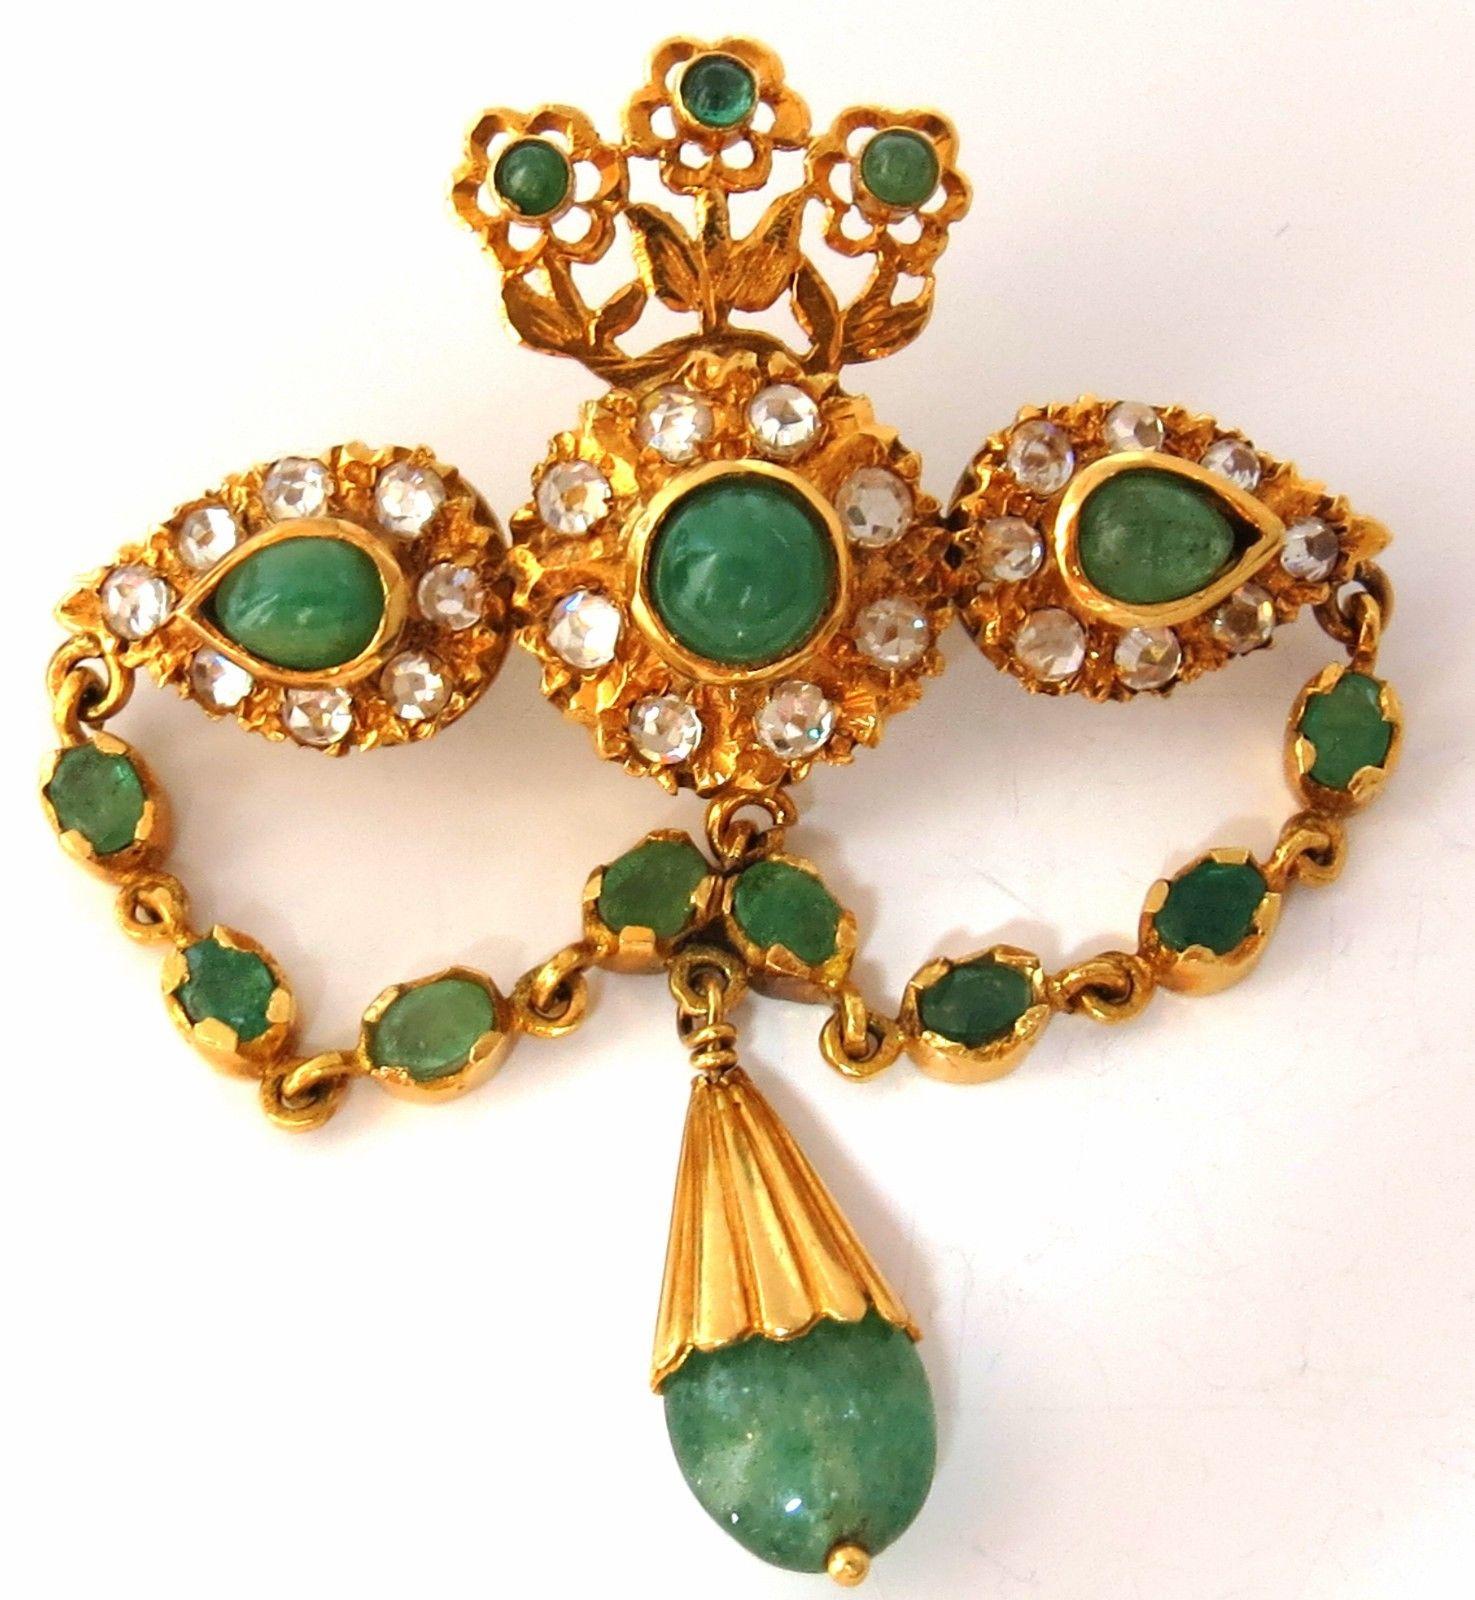 Majestic Class.

4.00cts of emeralds & white sapphires brooch pin.

Cabochons & Old miner cuts.

18kt yellow gold 

22 grams.

Overall: 2.42 X 2.09 inch

Excellent made 